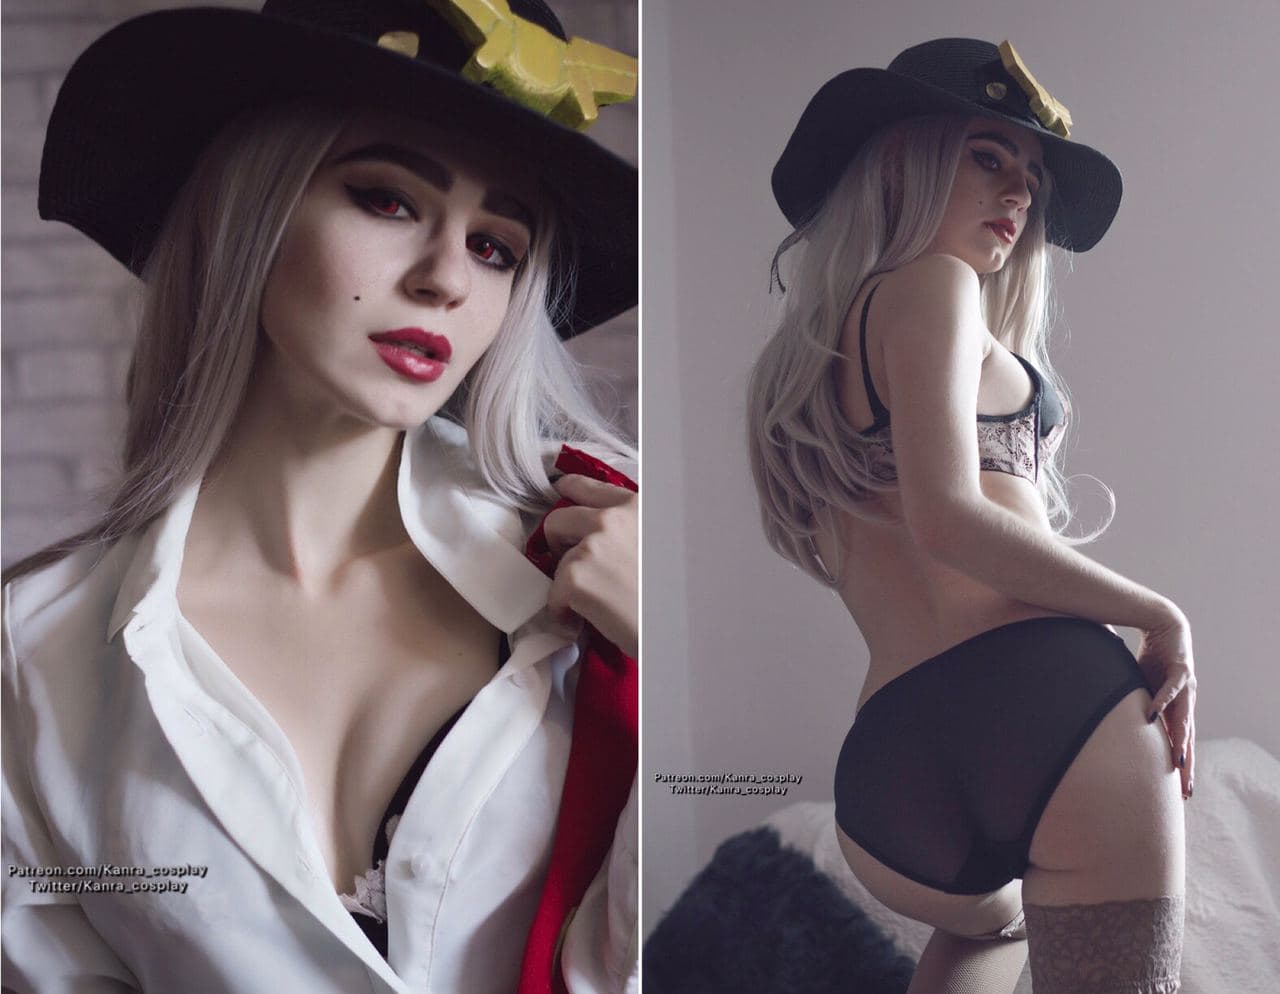 Ashe From Overwatch Do You Play Overwatch This Days By Kanra Cospla